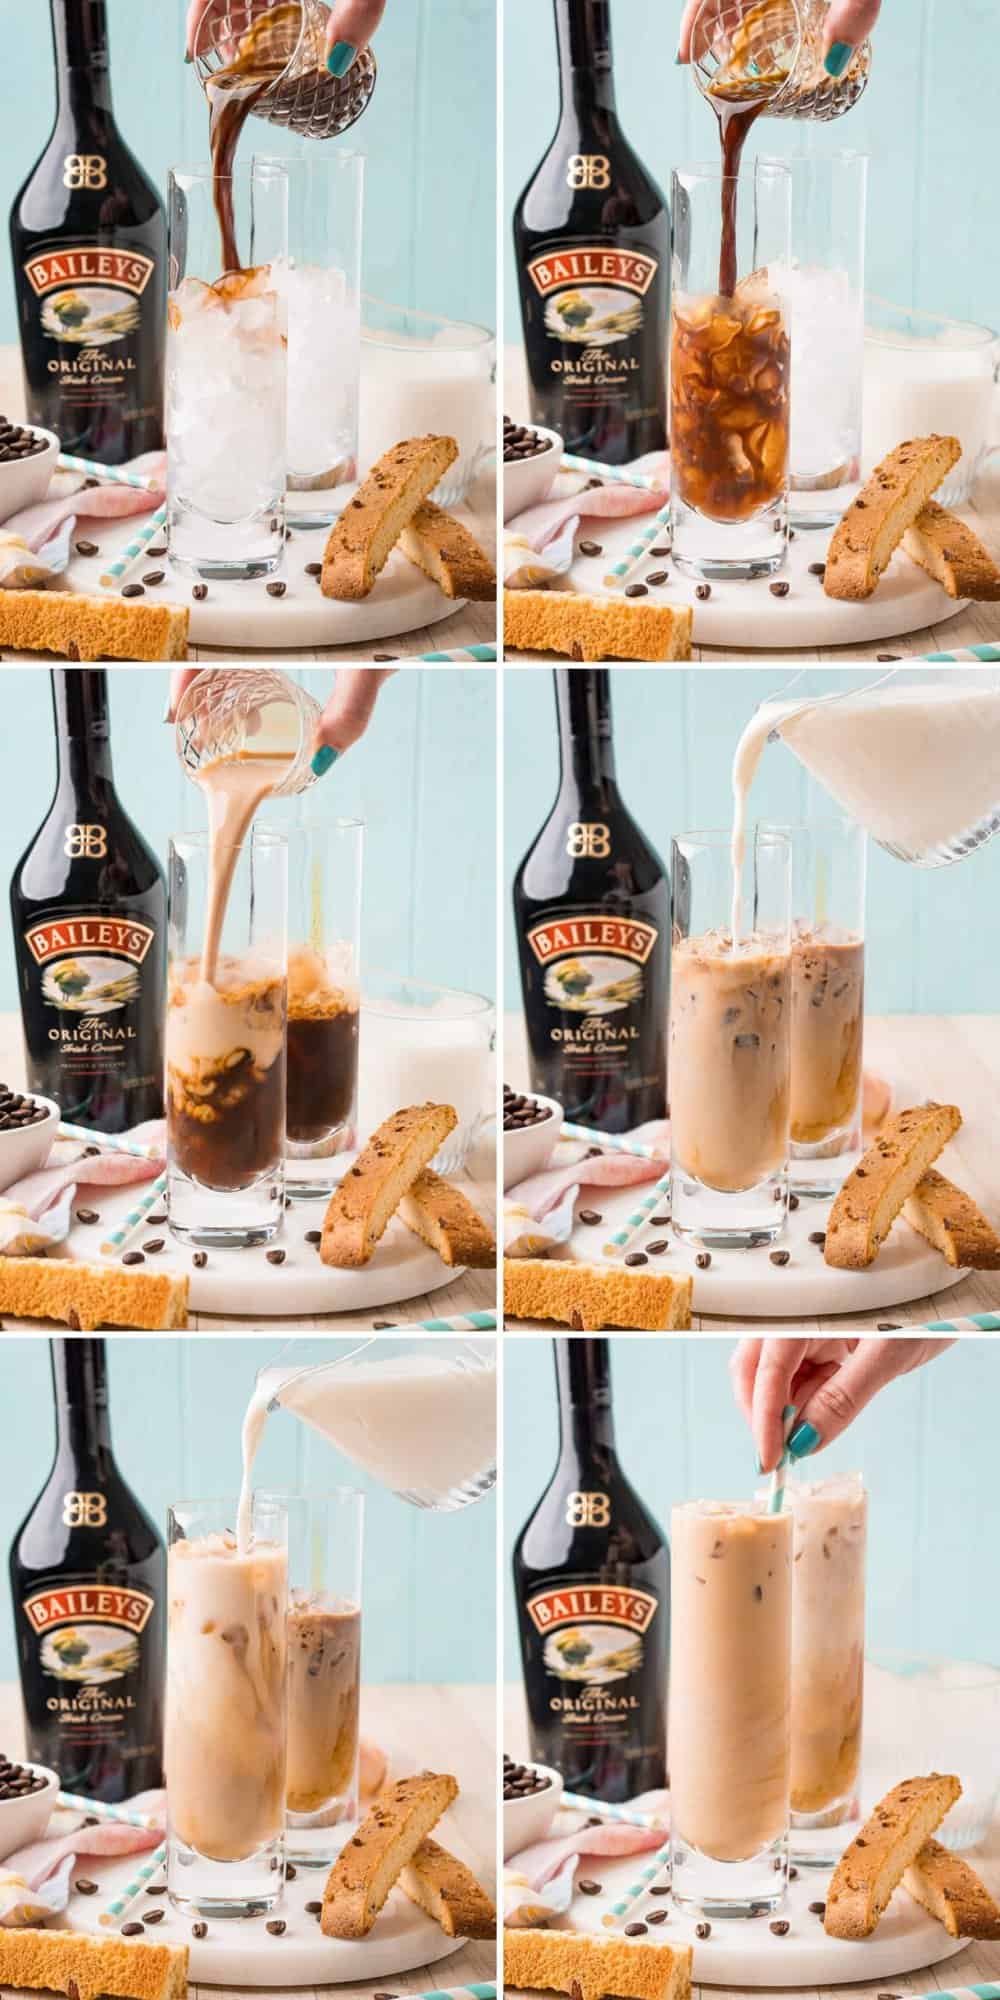 Steps to making the iced latte.